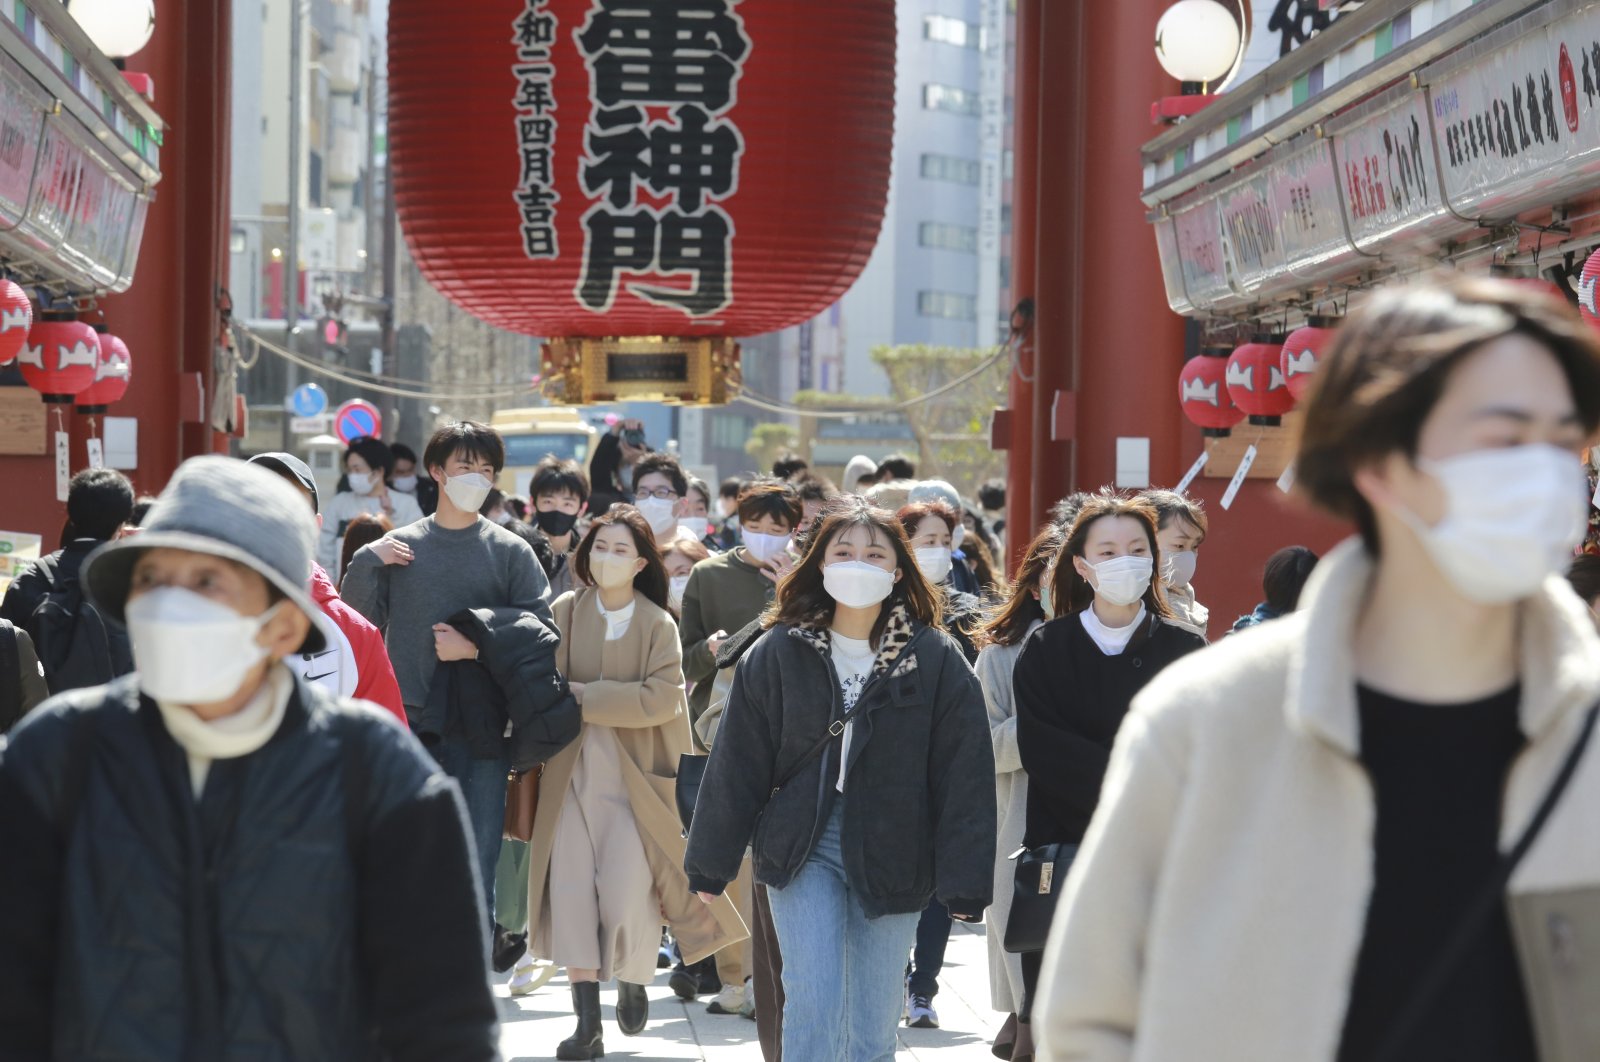 People wearing face masks to protect against the spread of the coronavirus walk through a shopping arcade in the Asakusa district in Tokyo, Japan, March 7, 2022. (AP Photo)